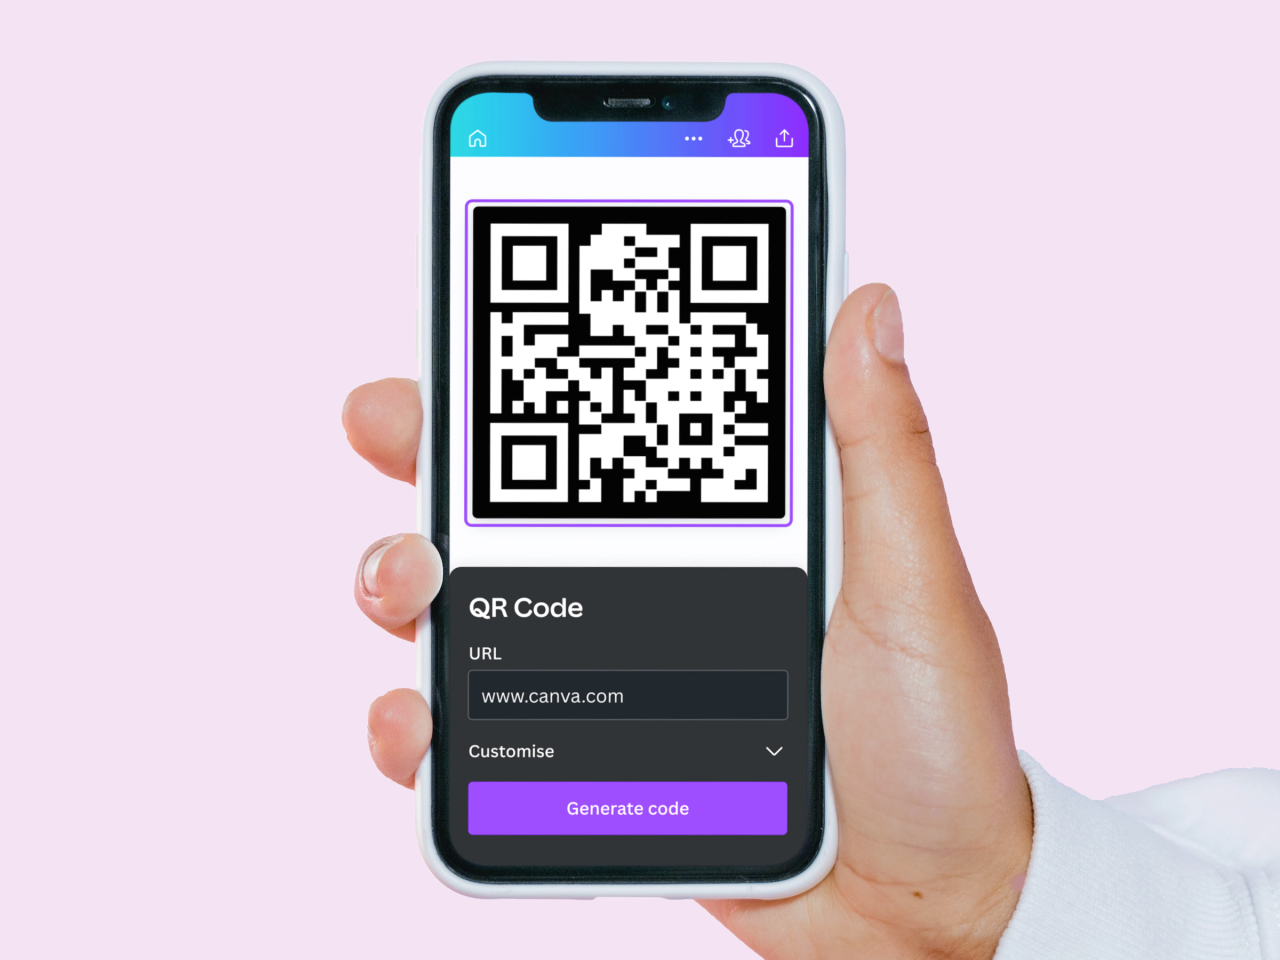 Free Qr Code Generator - Create Qr Codes With Ease - Canva